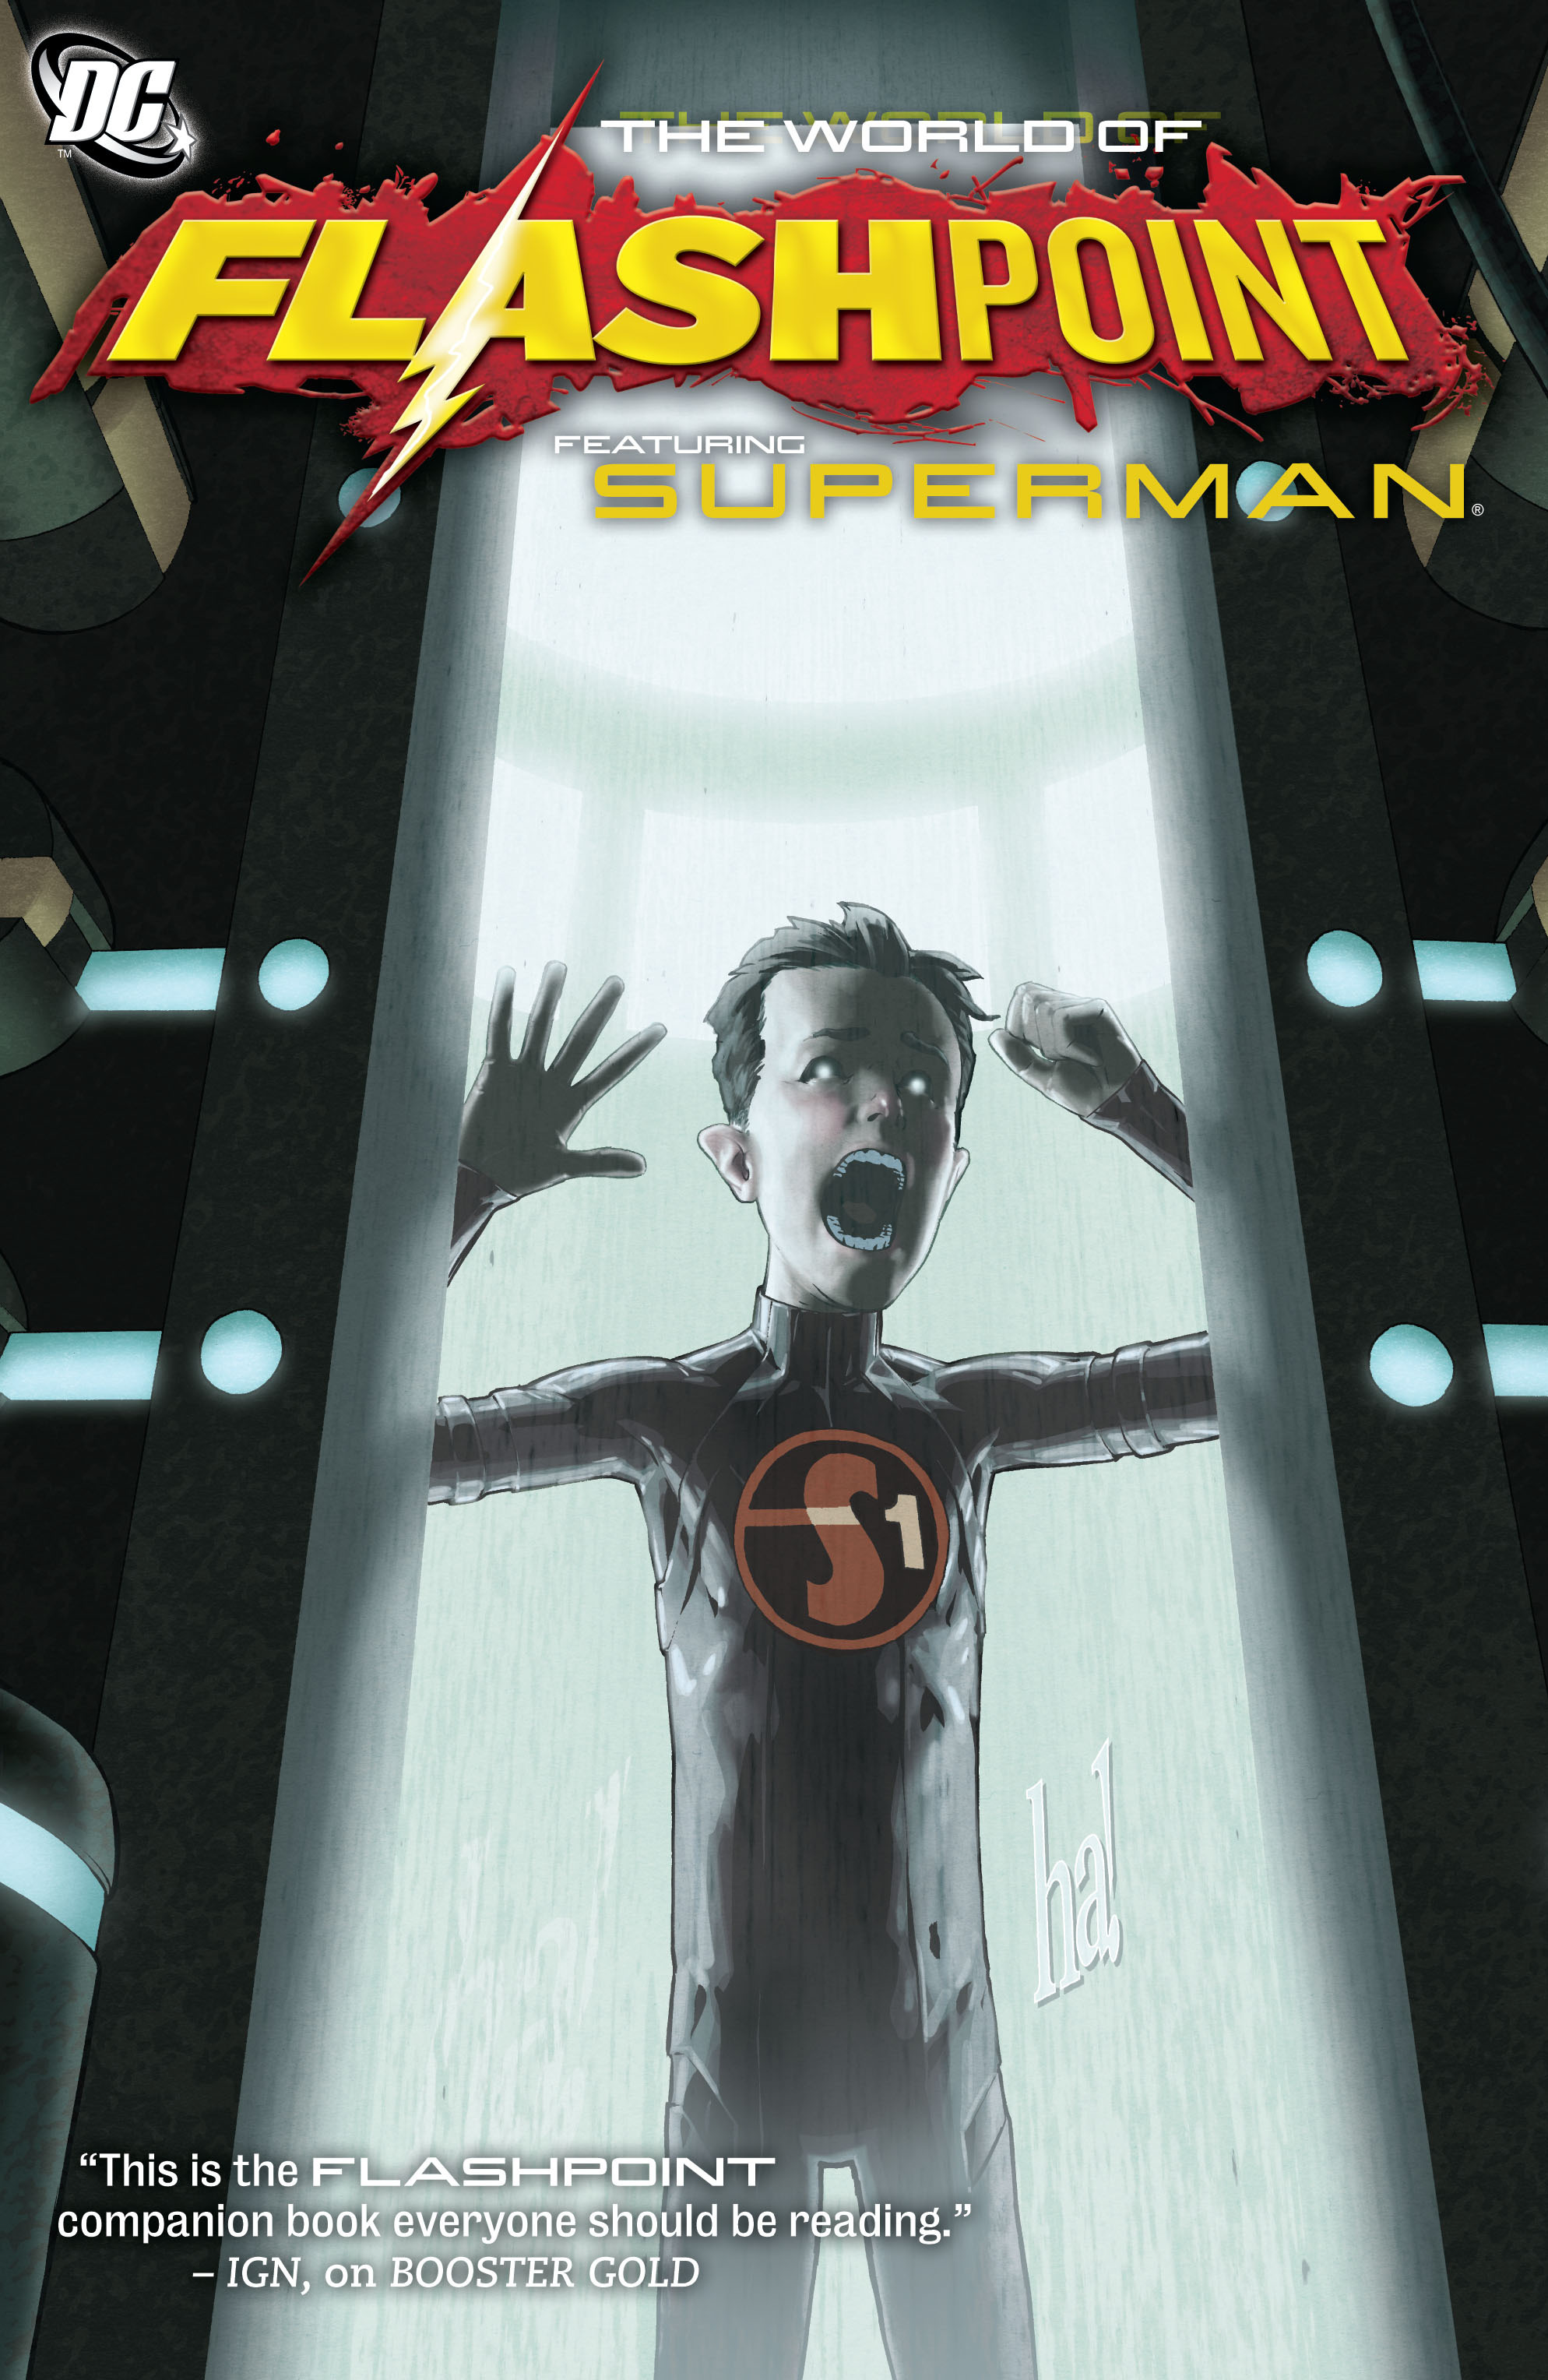 Read online Flashpoint: The World of Flashpoint Featuring Superman comic -  Issue # Full - 1